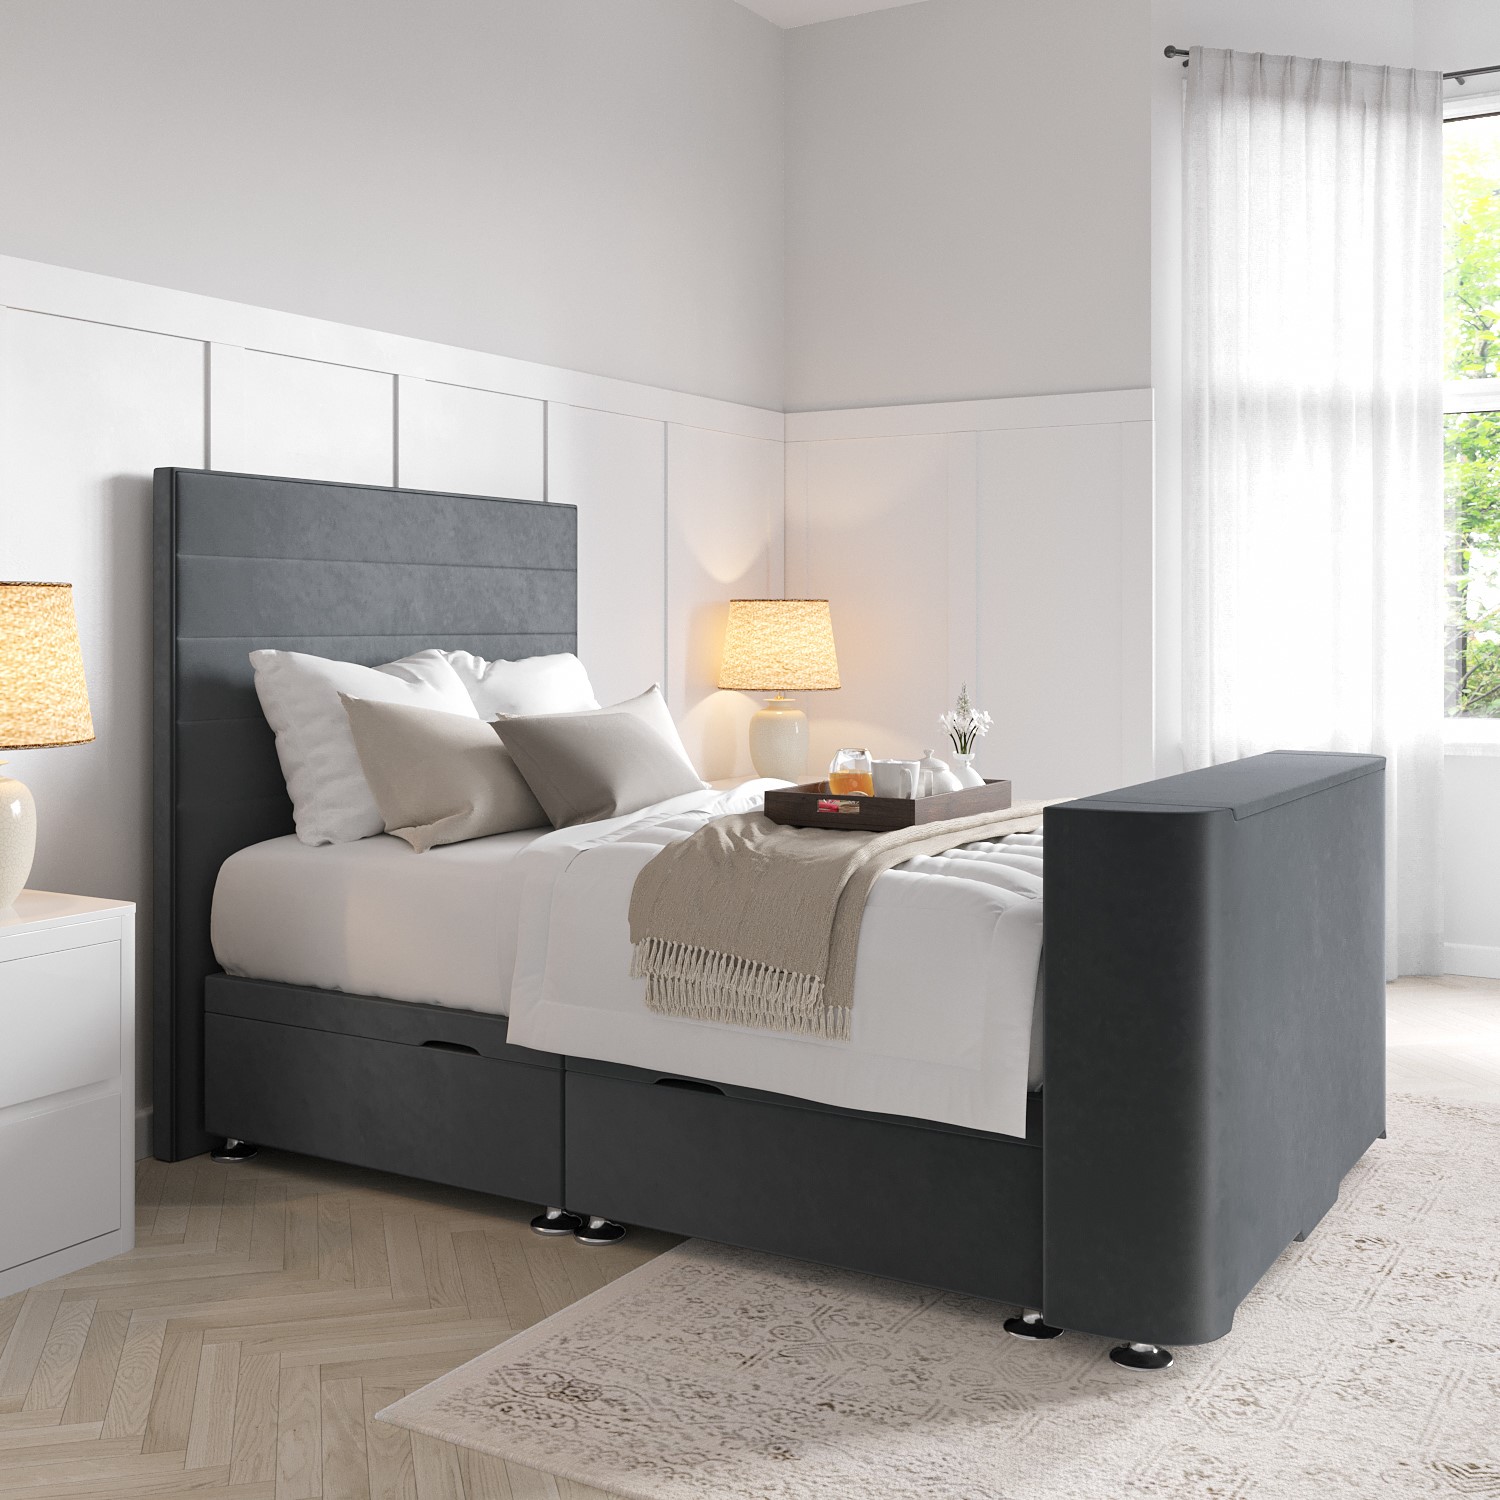 Read more about King size tv ottoman bed in grey velvet with stripe headboard eden